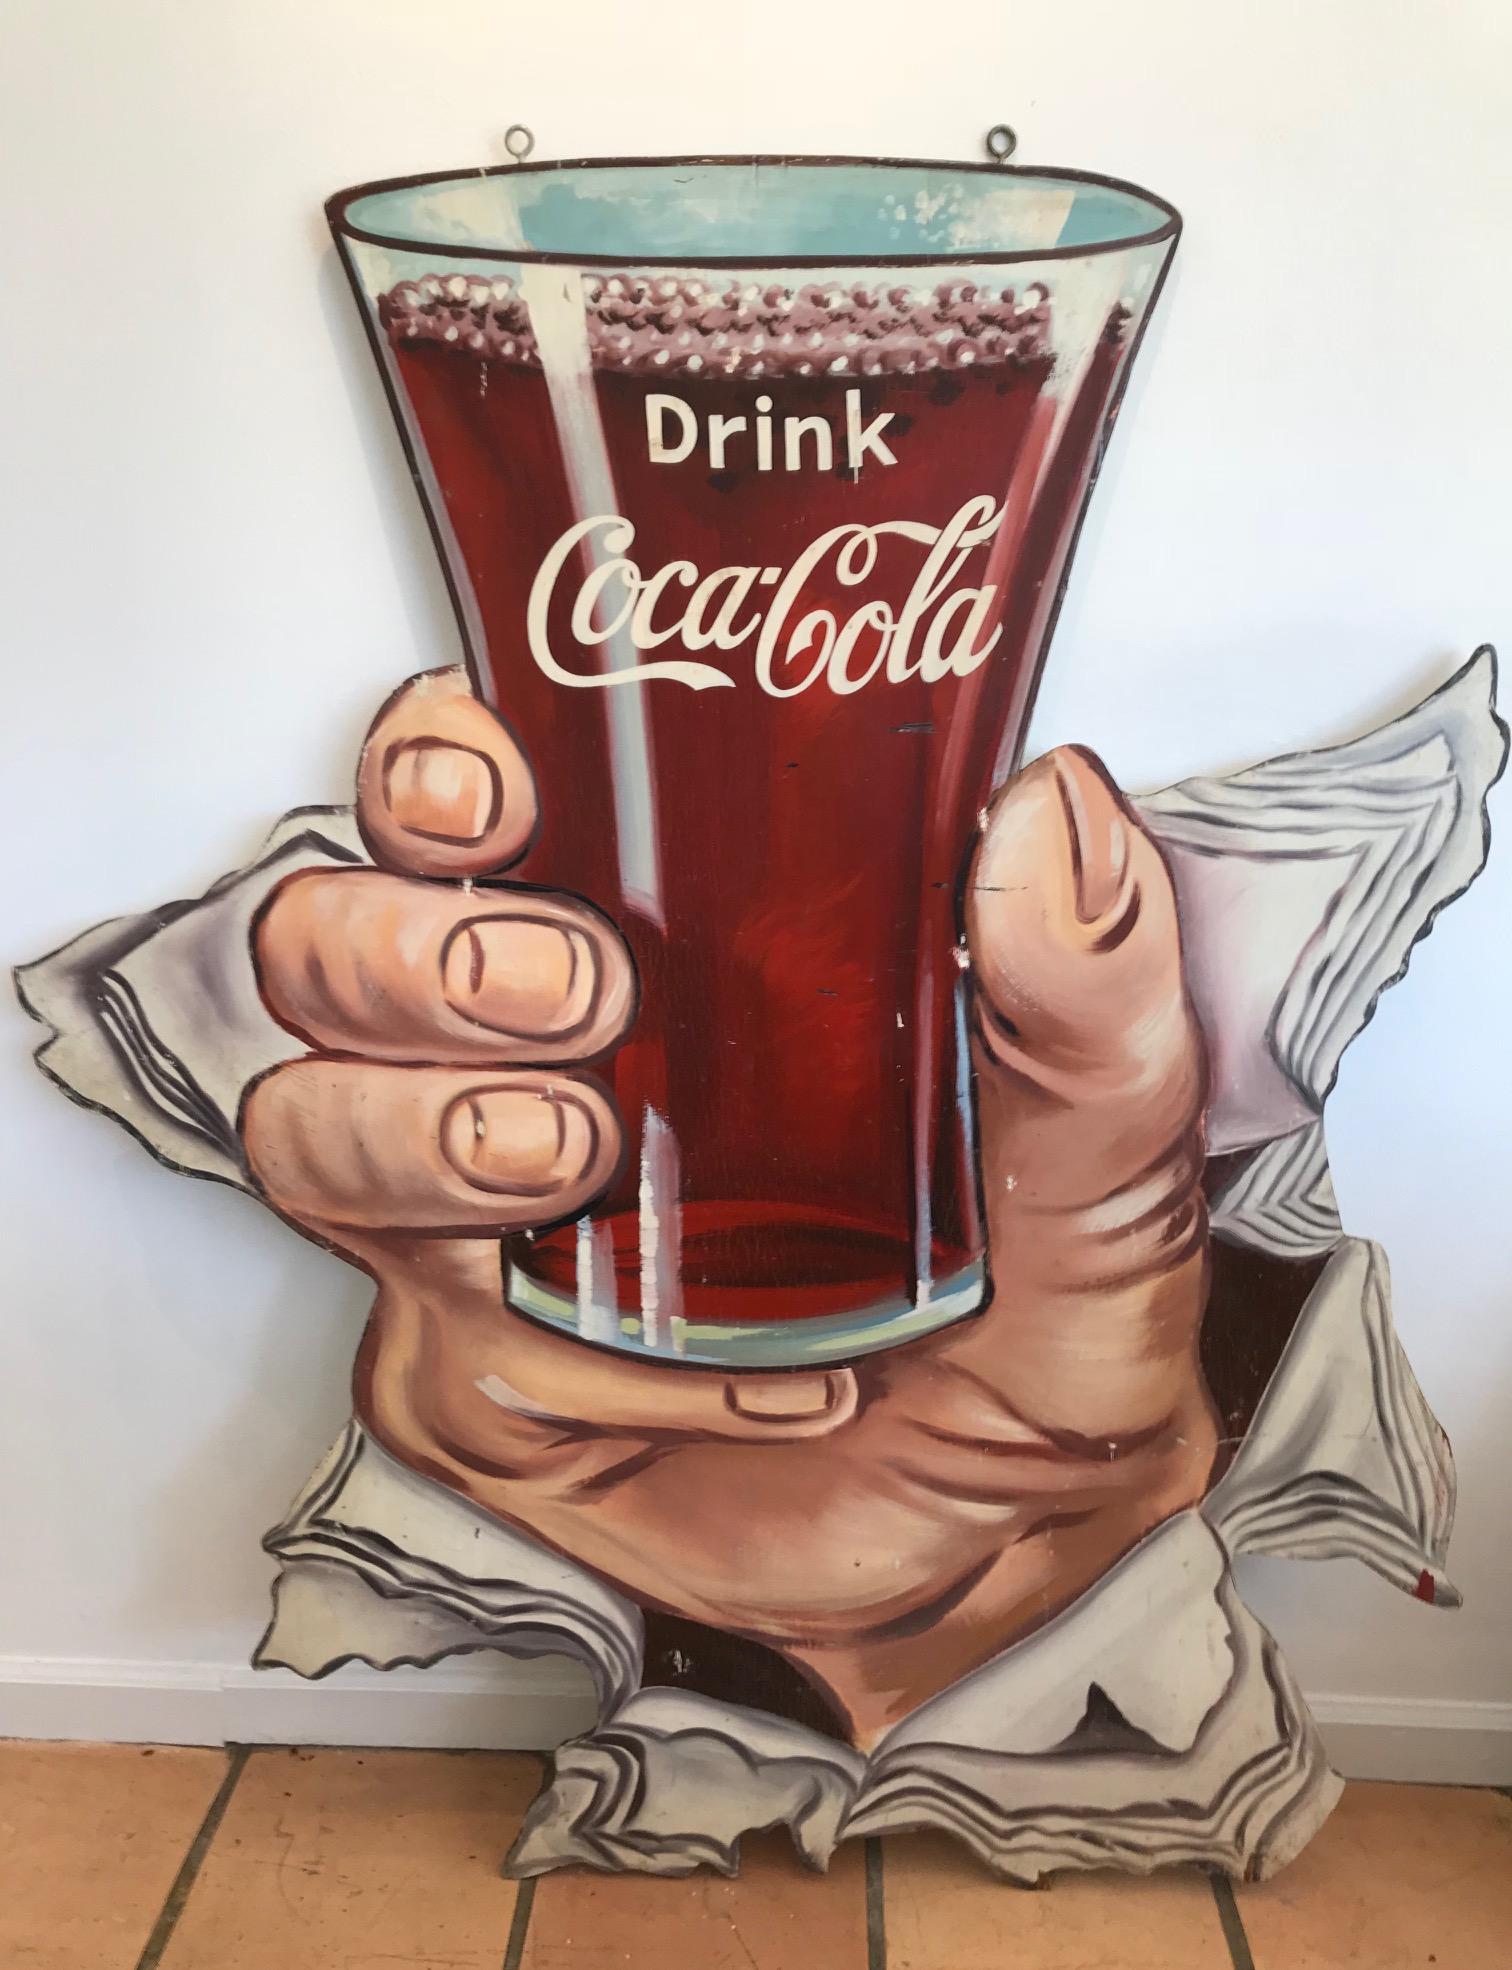 Coca-Cola sign - Unique Hand-Painted Wood Coke Sign - "Drink Coca-Cola" c 1950s  - Art by Unknown